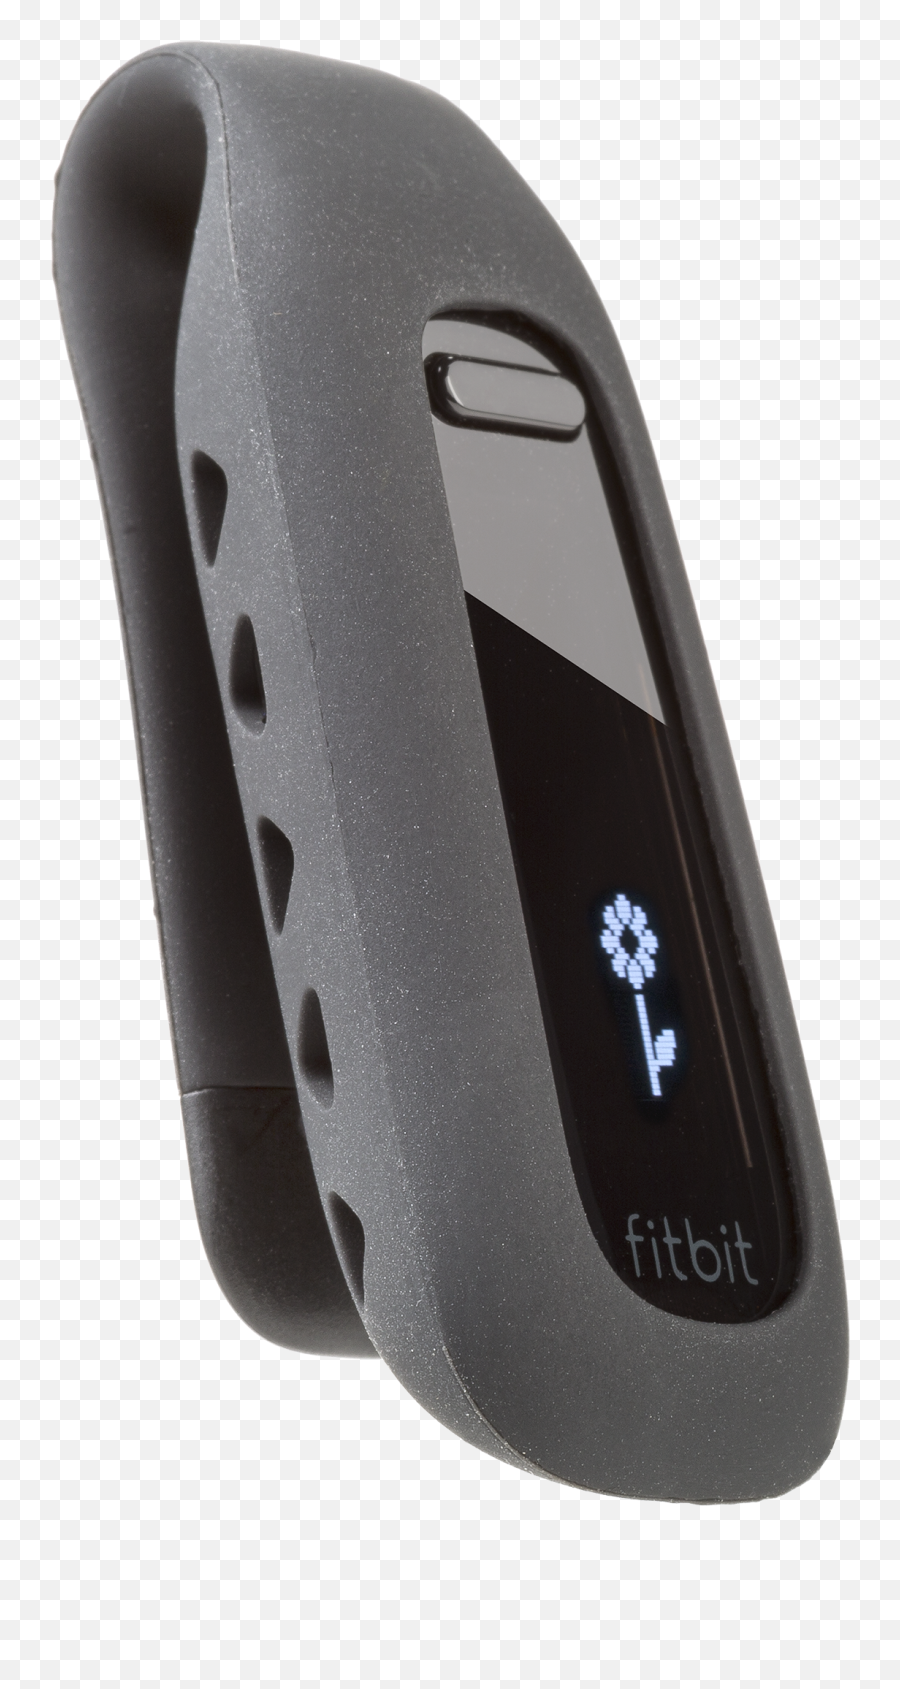 Fitbit One Fitness Tracker - Portable Emoji,Fitbit Emojis Android